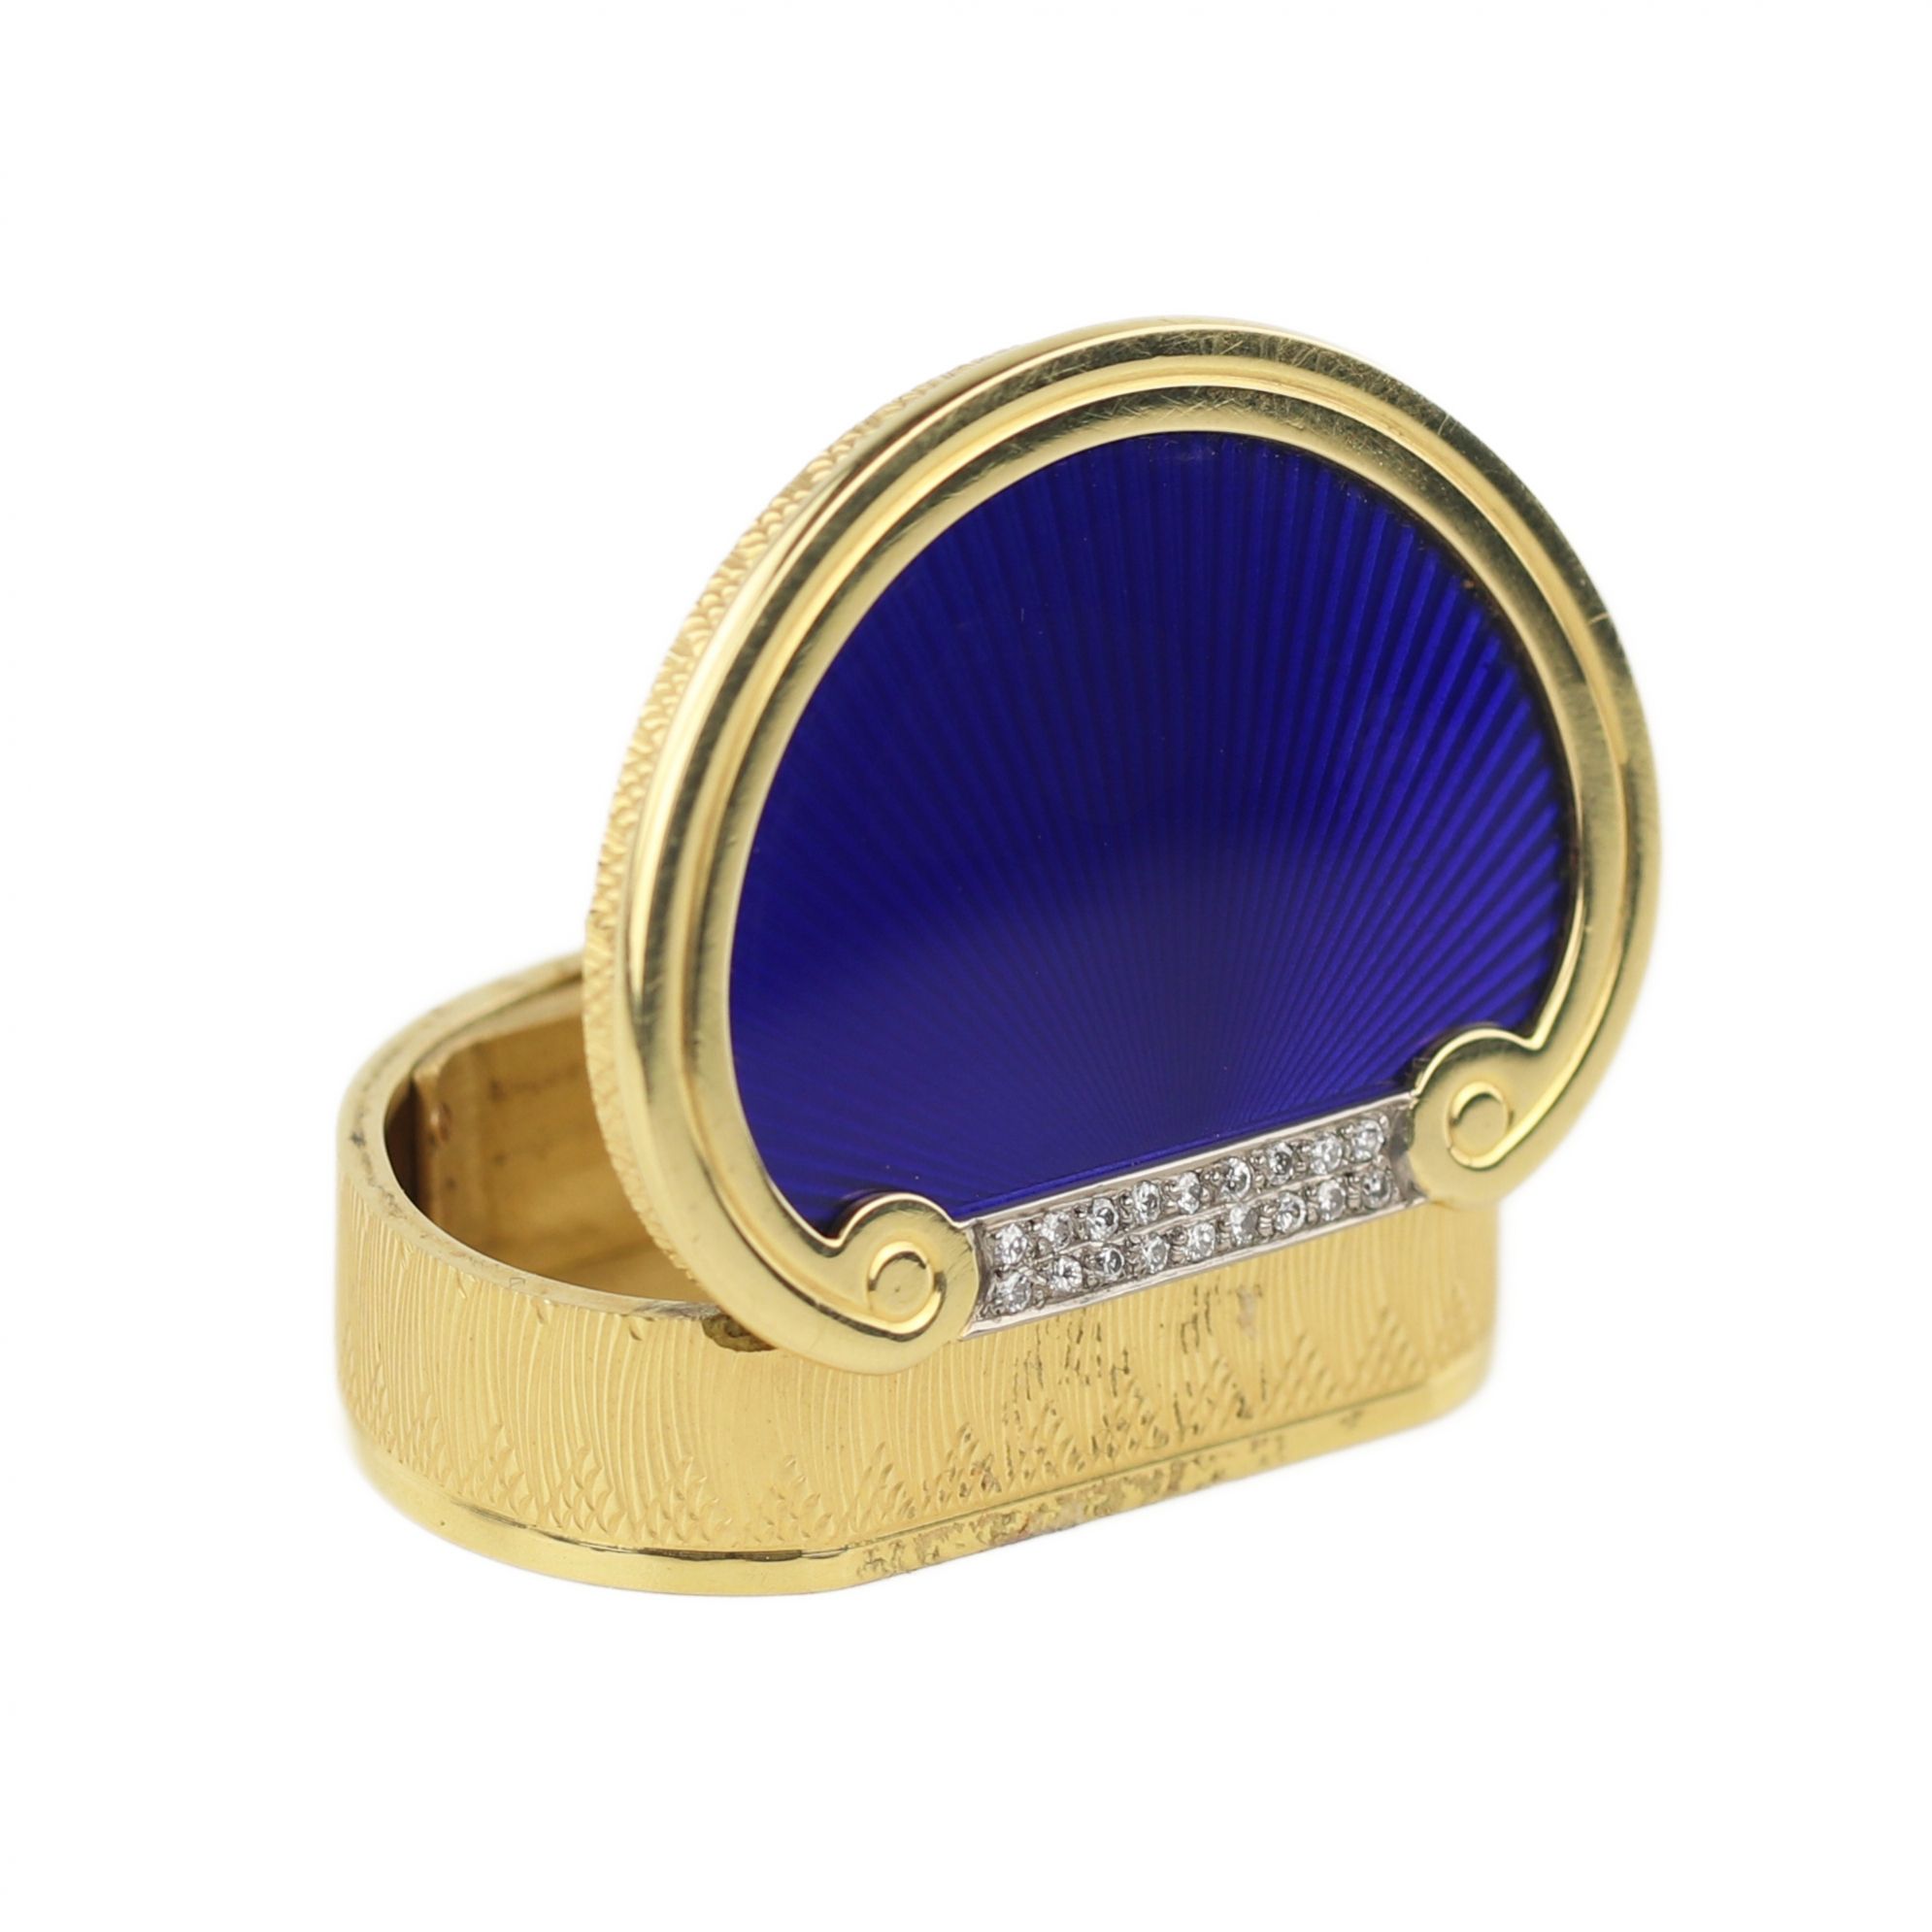 19th century English gold pill box with diamonds and guilloche enamel. - Image 5 of 8